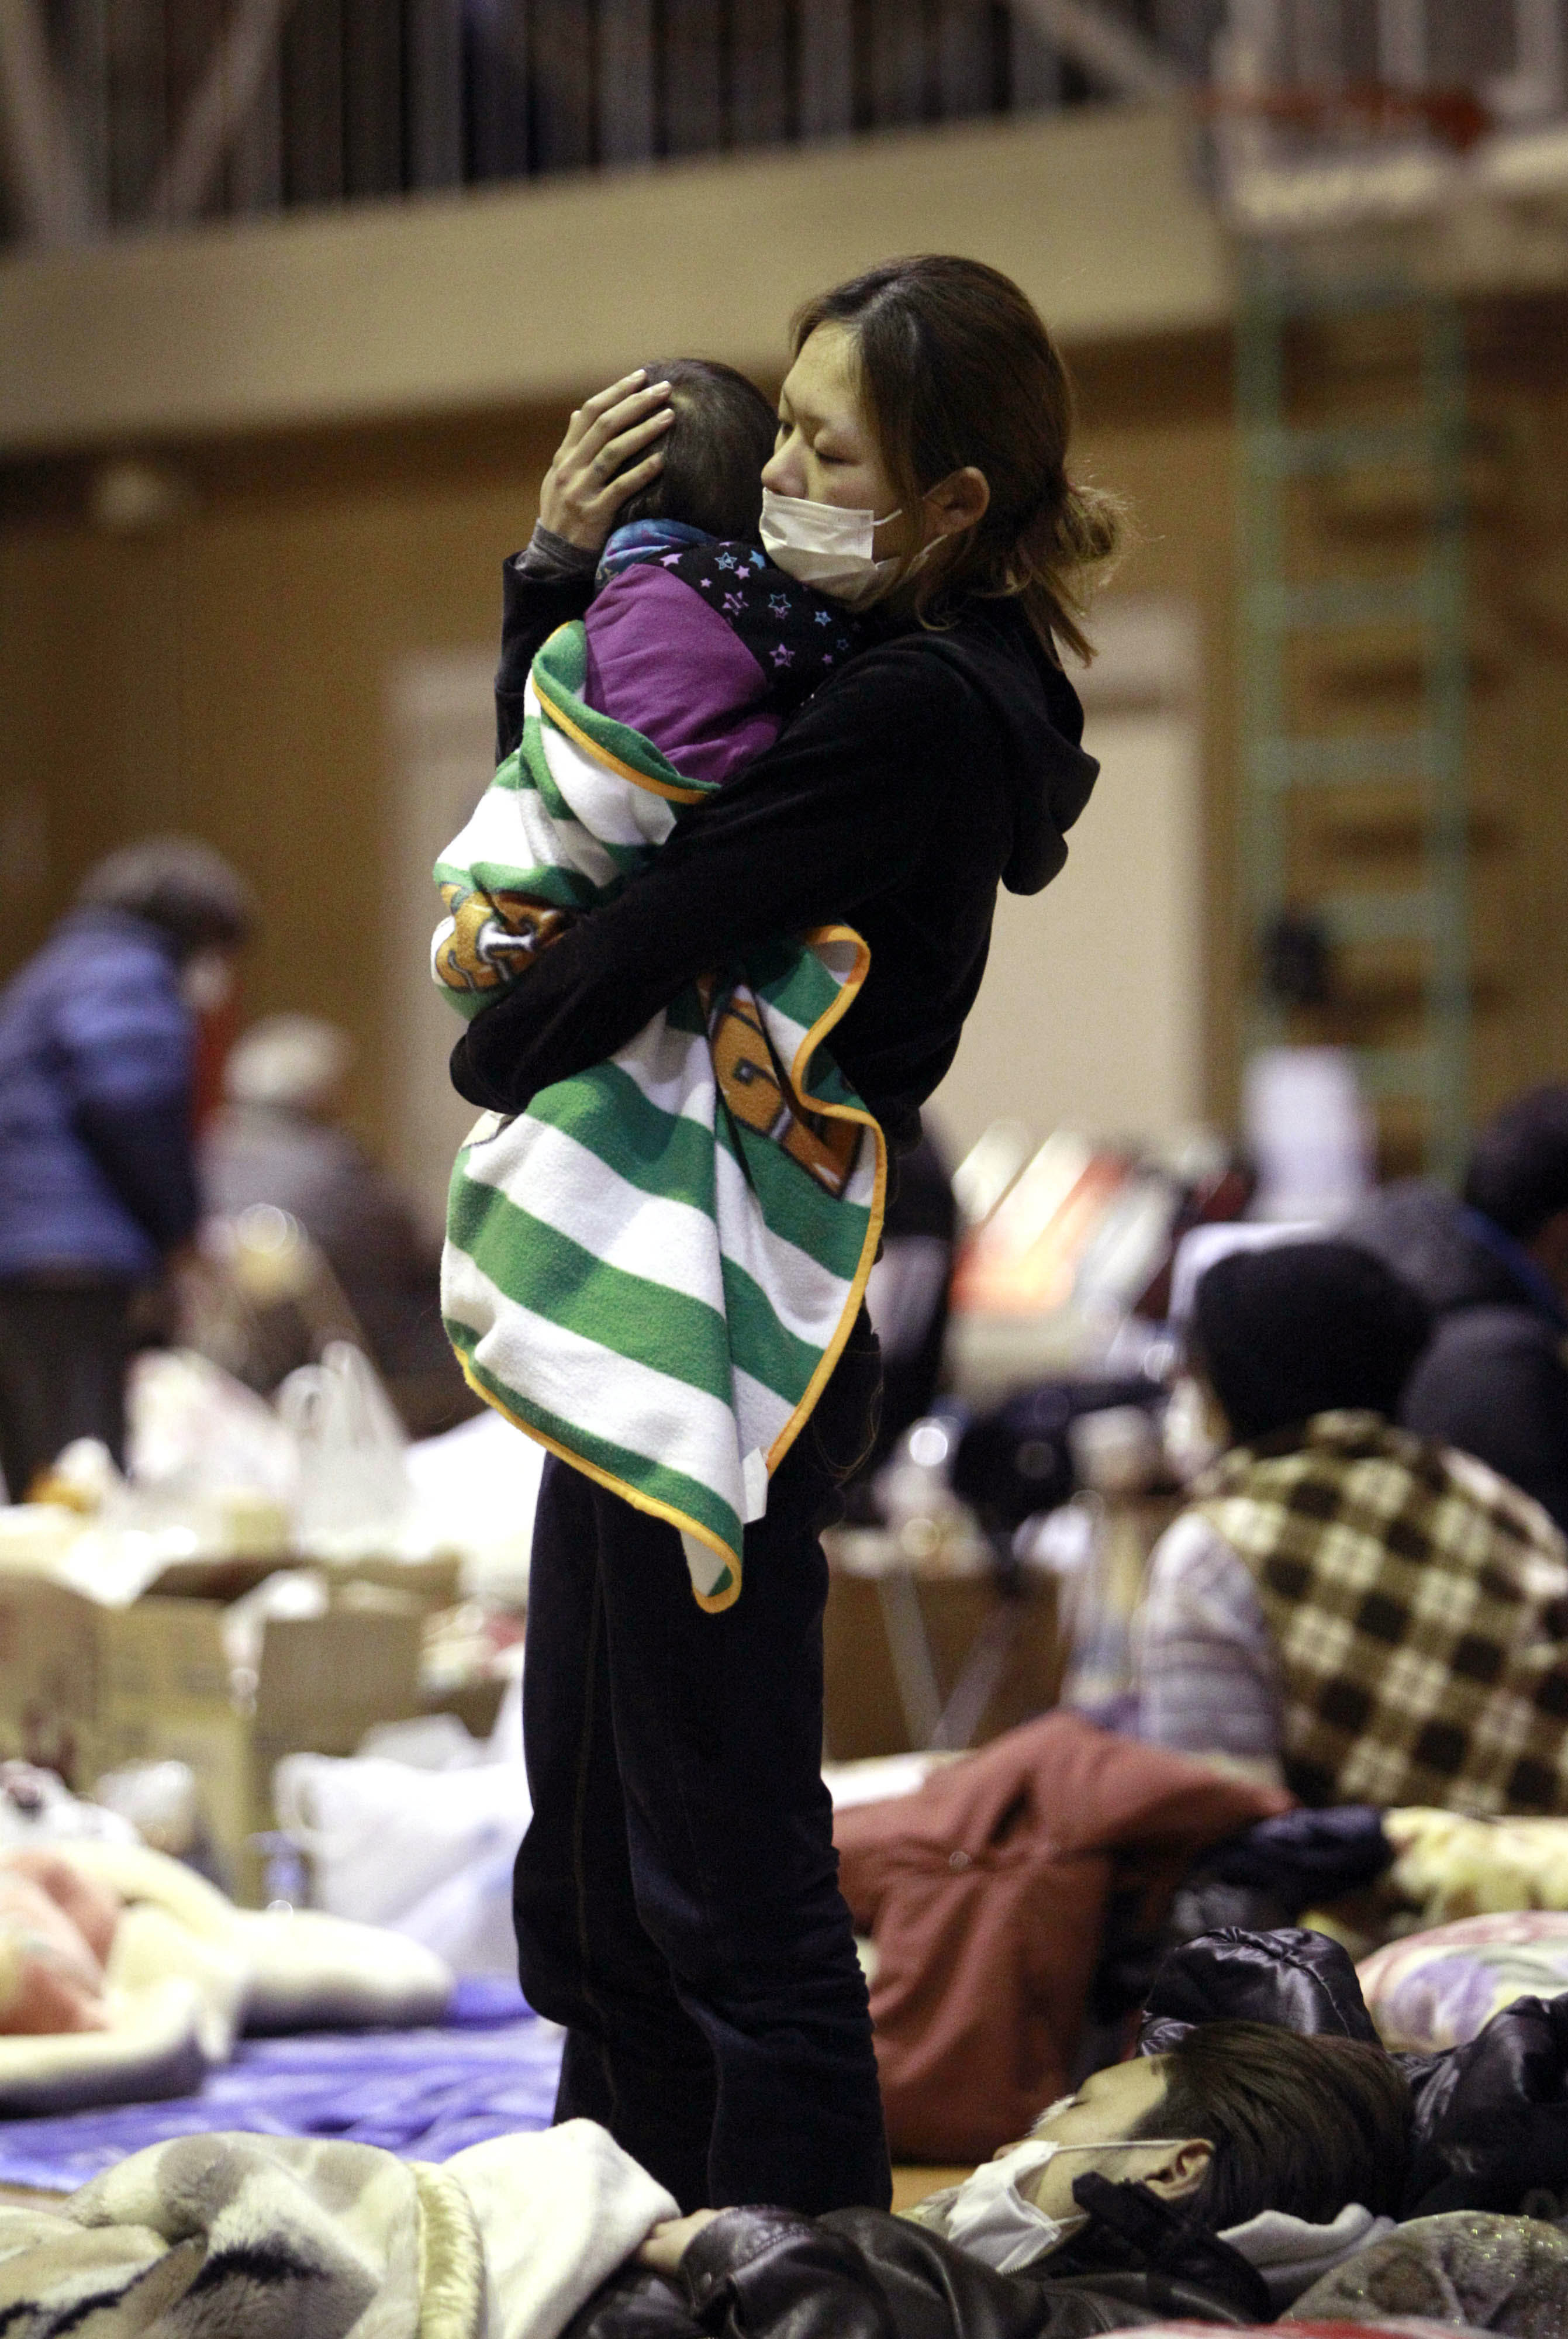 Especially vulnerable: A woman holds her child at a shelter in Fukushima city after being evacuated from an area near the Fukushima No. 1 nuclear plant a few days after the March 11, 2011,  earthquake and tsunami. | AP